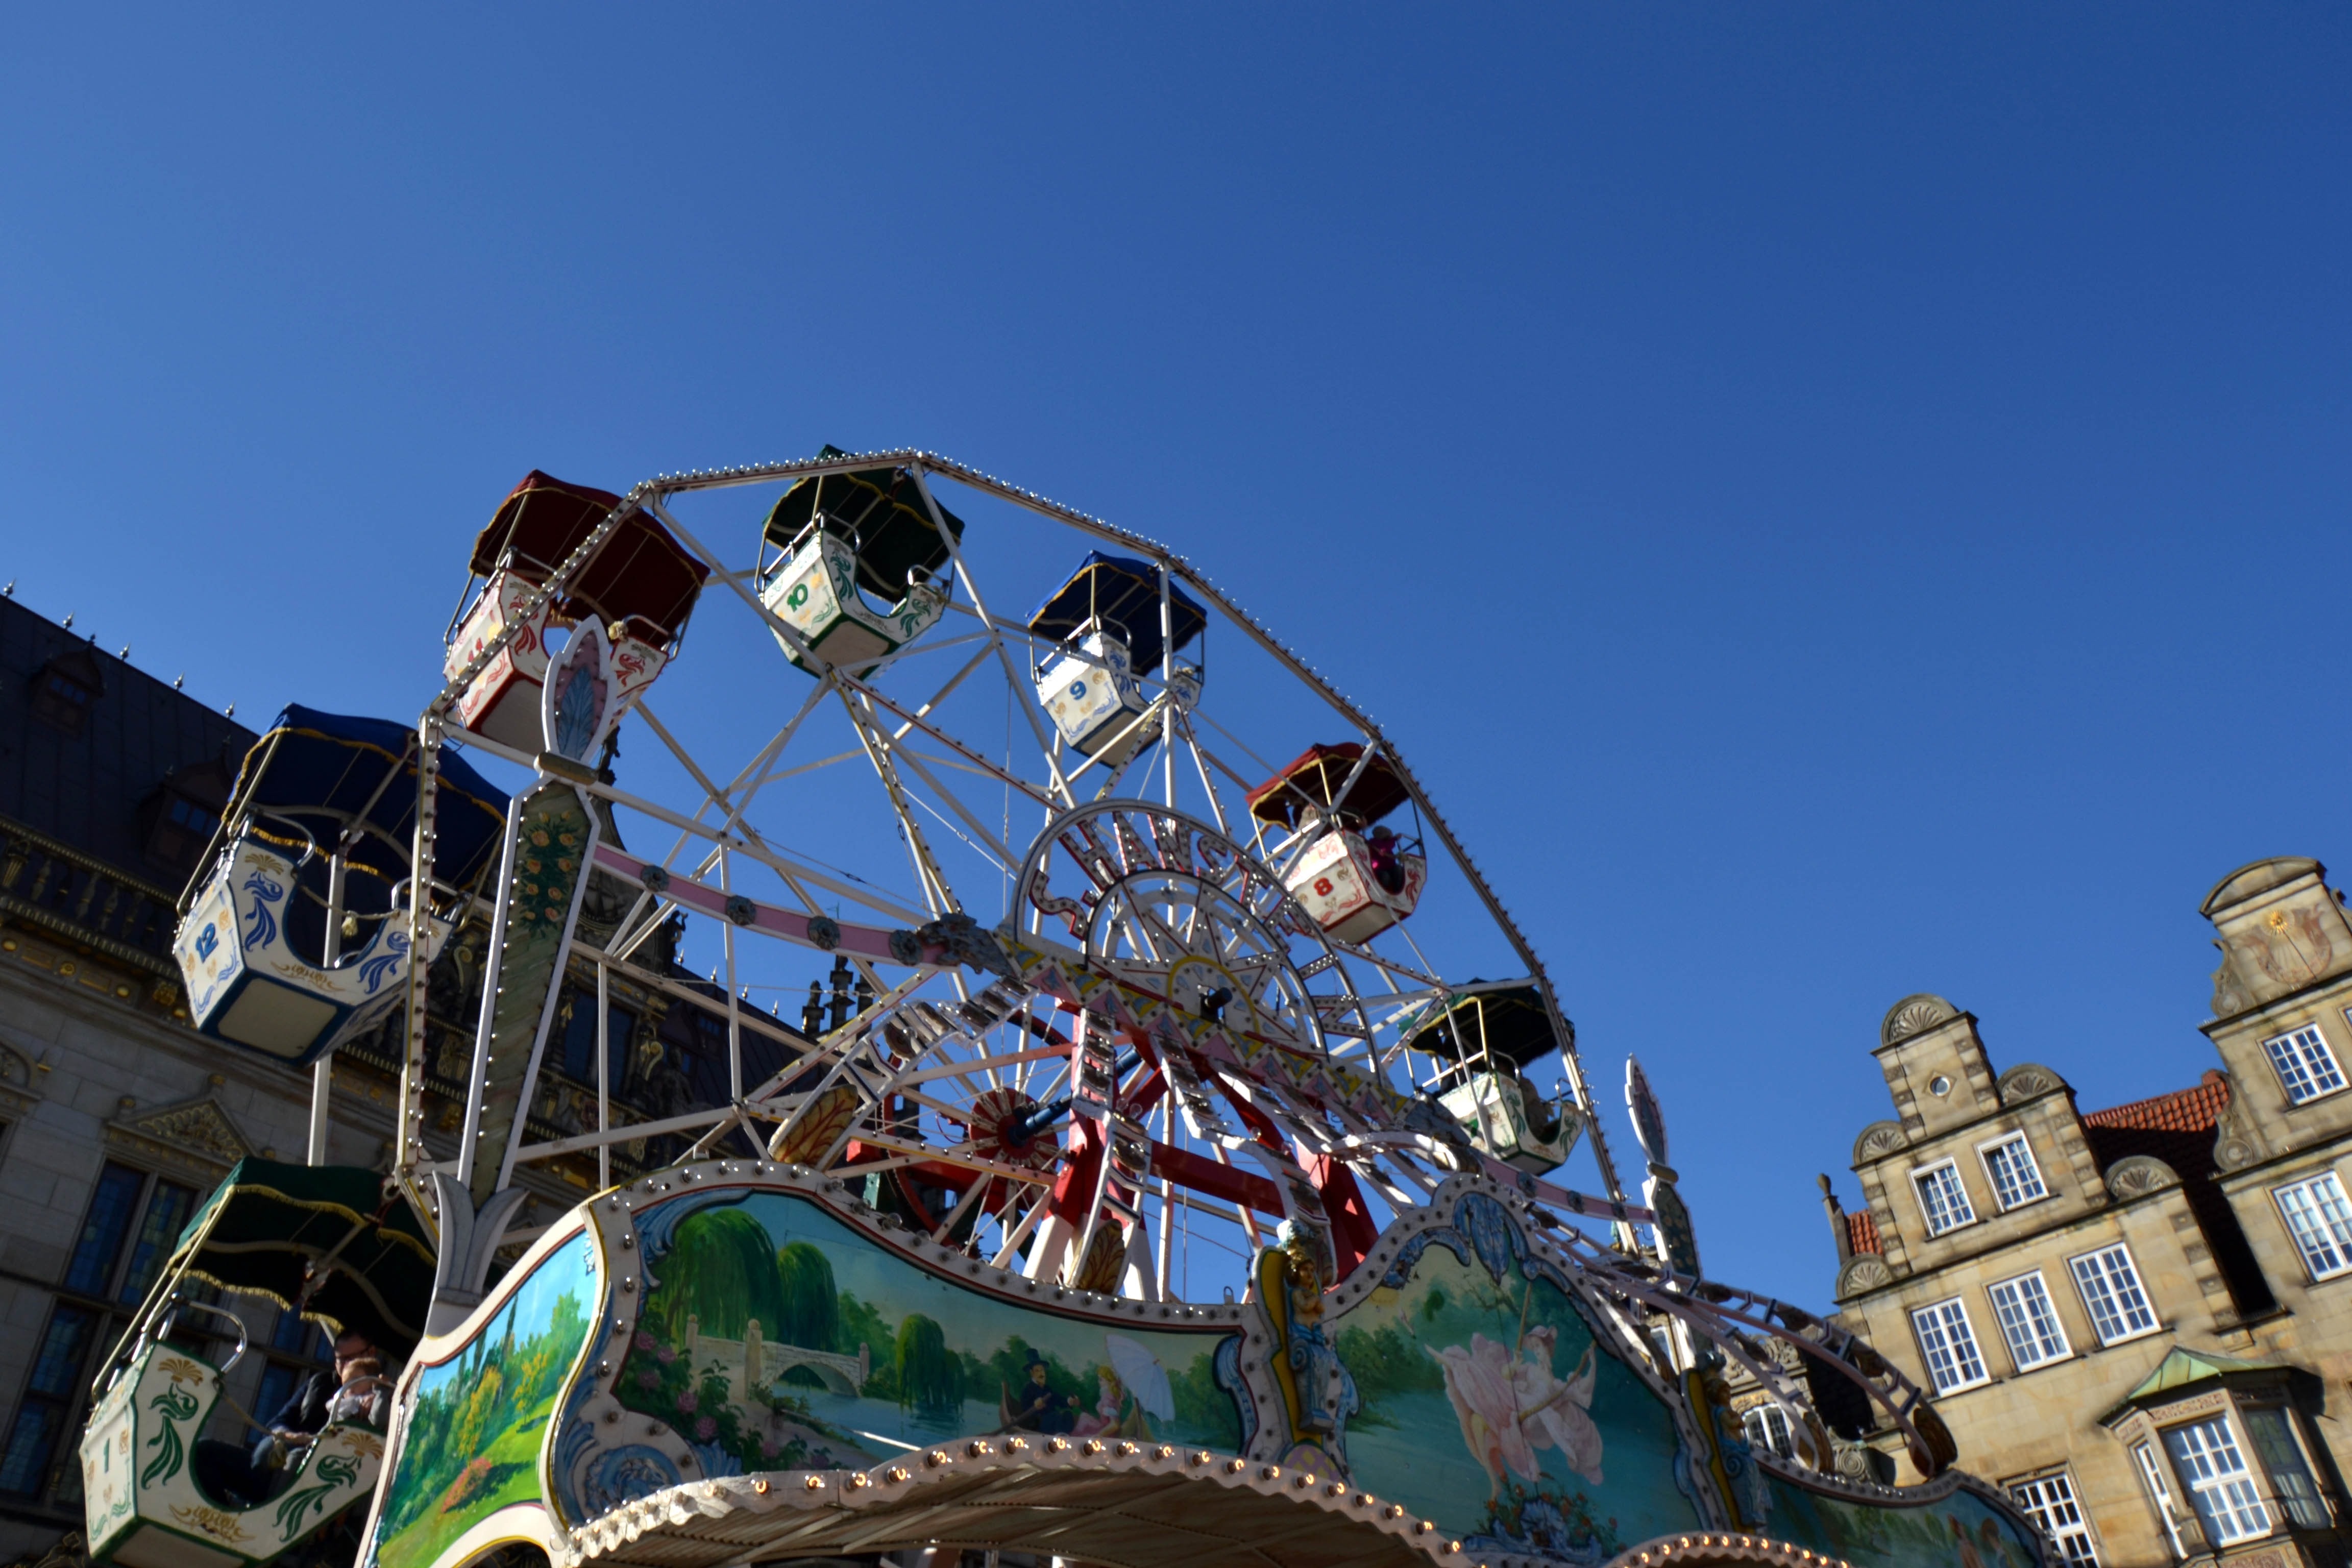 low angle view of ferris wheel under blue skies